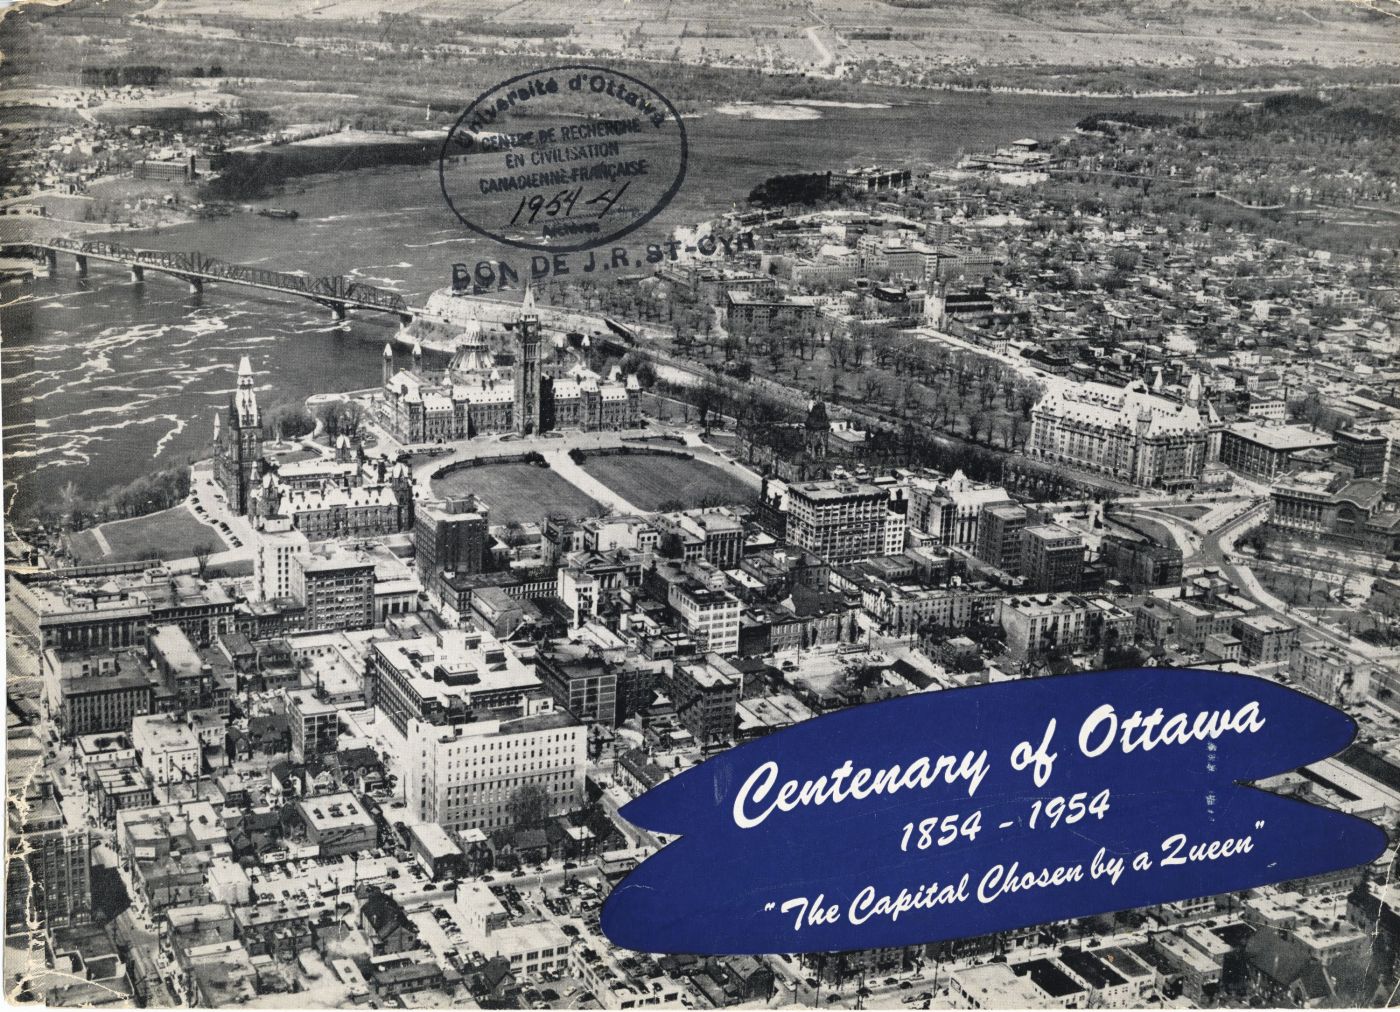 A black and white photograph showing a close-up aerial view of downtown Ottawa with the Parliament Buildings in the Centre. Text typewritten in English.